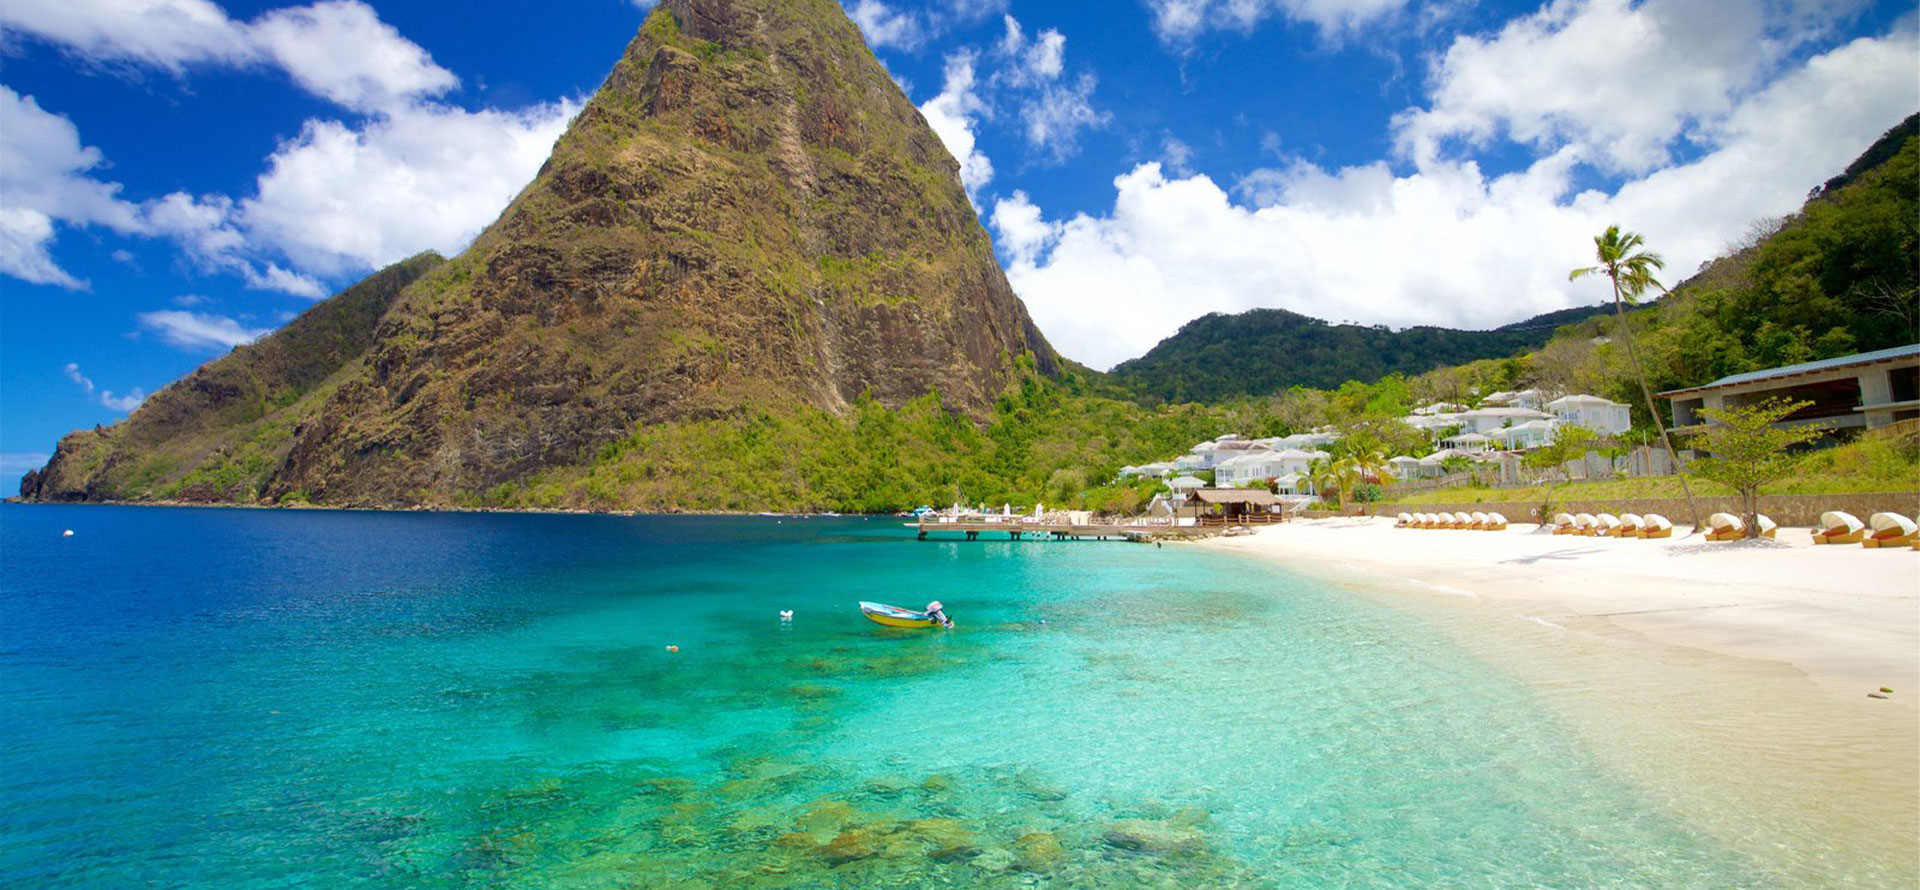 St. lucia island with all-inclusive resorts.